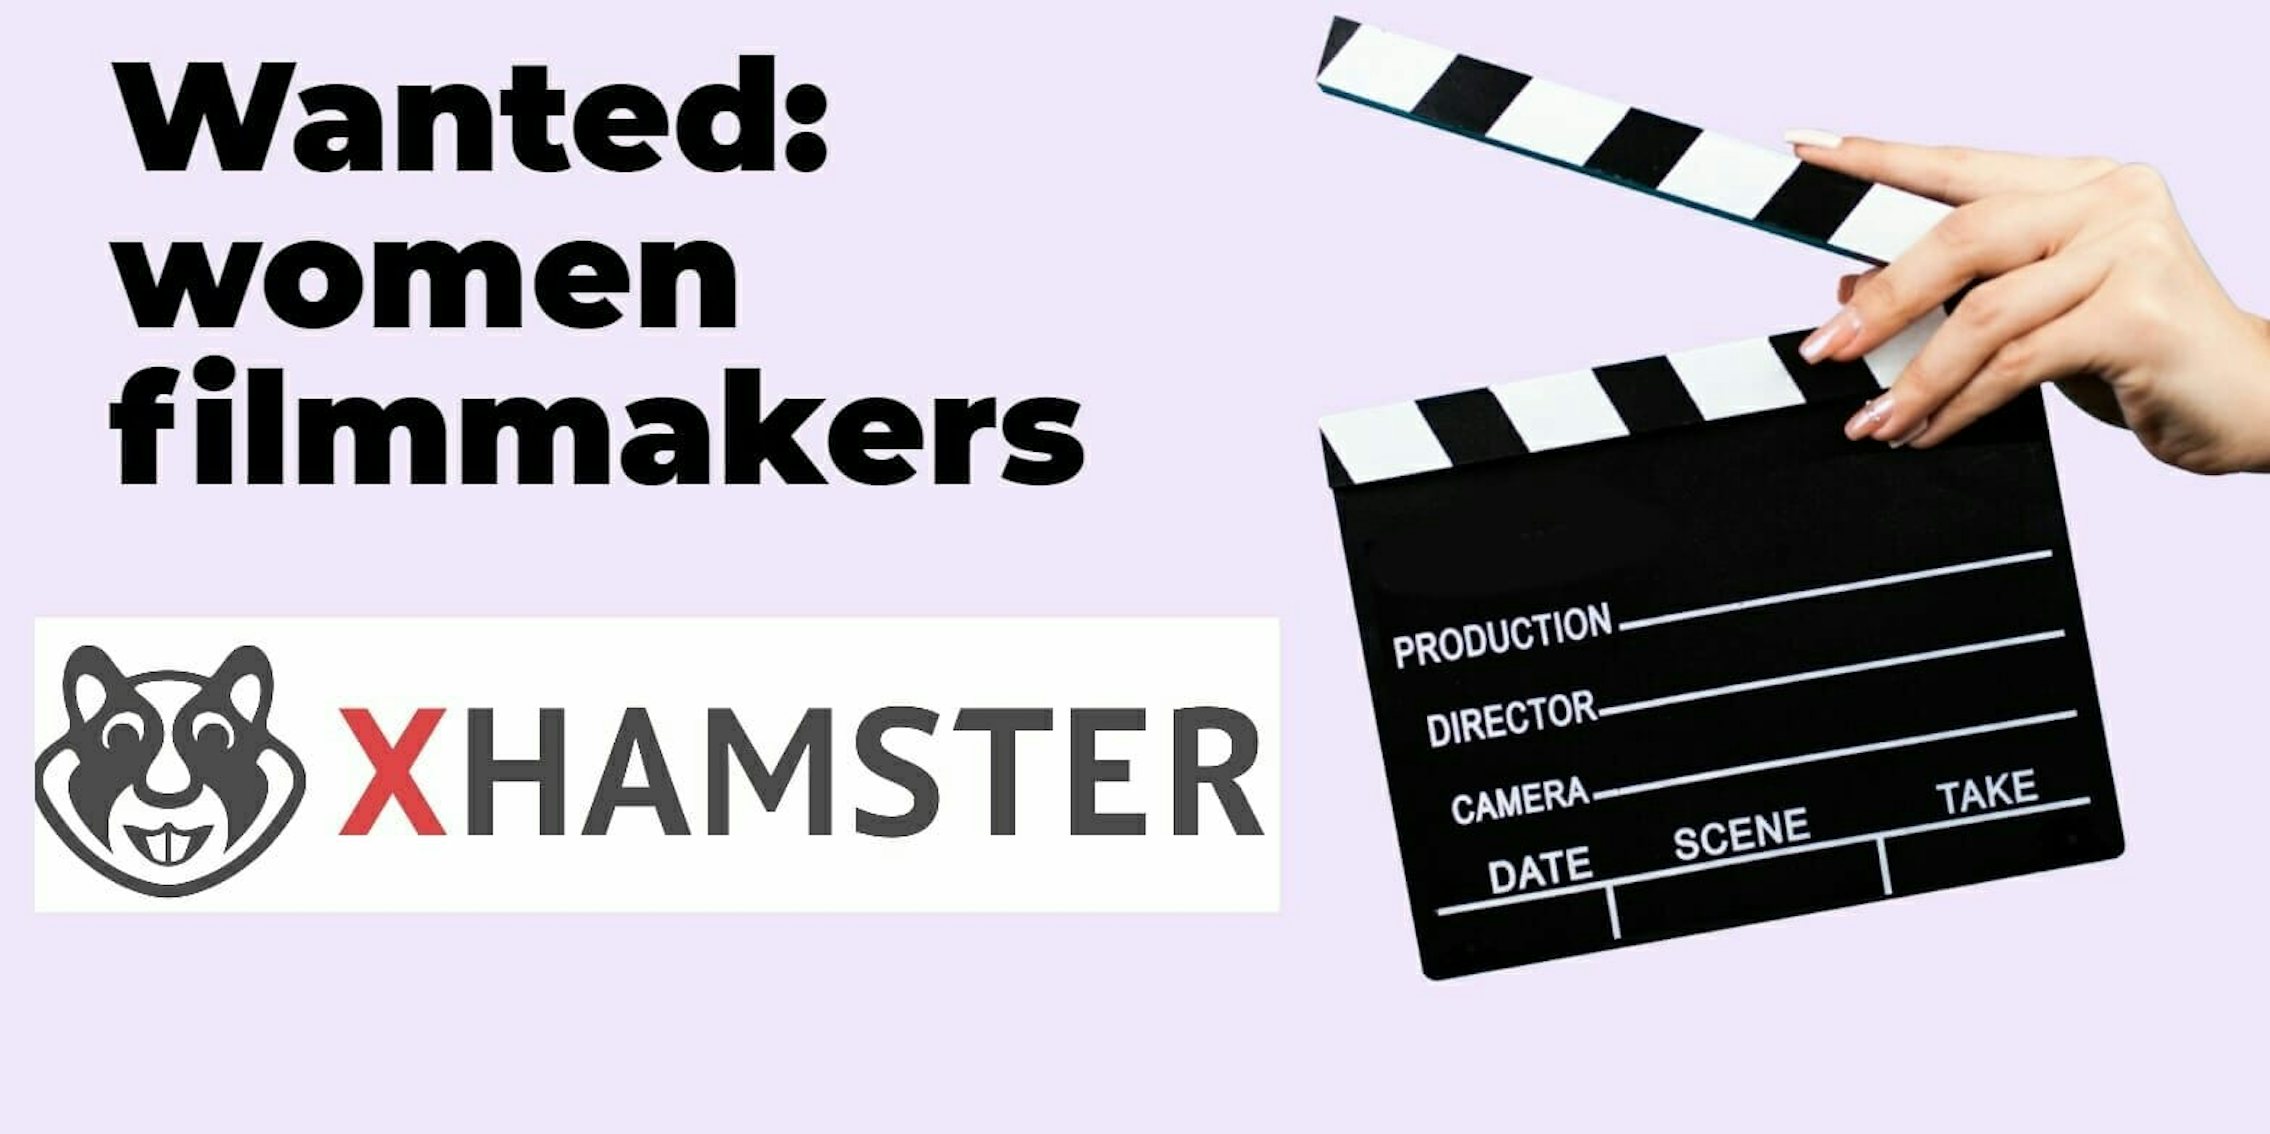 Hamster Porn Site - Porn Site Xhamster Is Fundraising for Female Adult Filmmakers